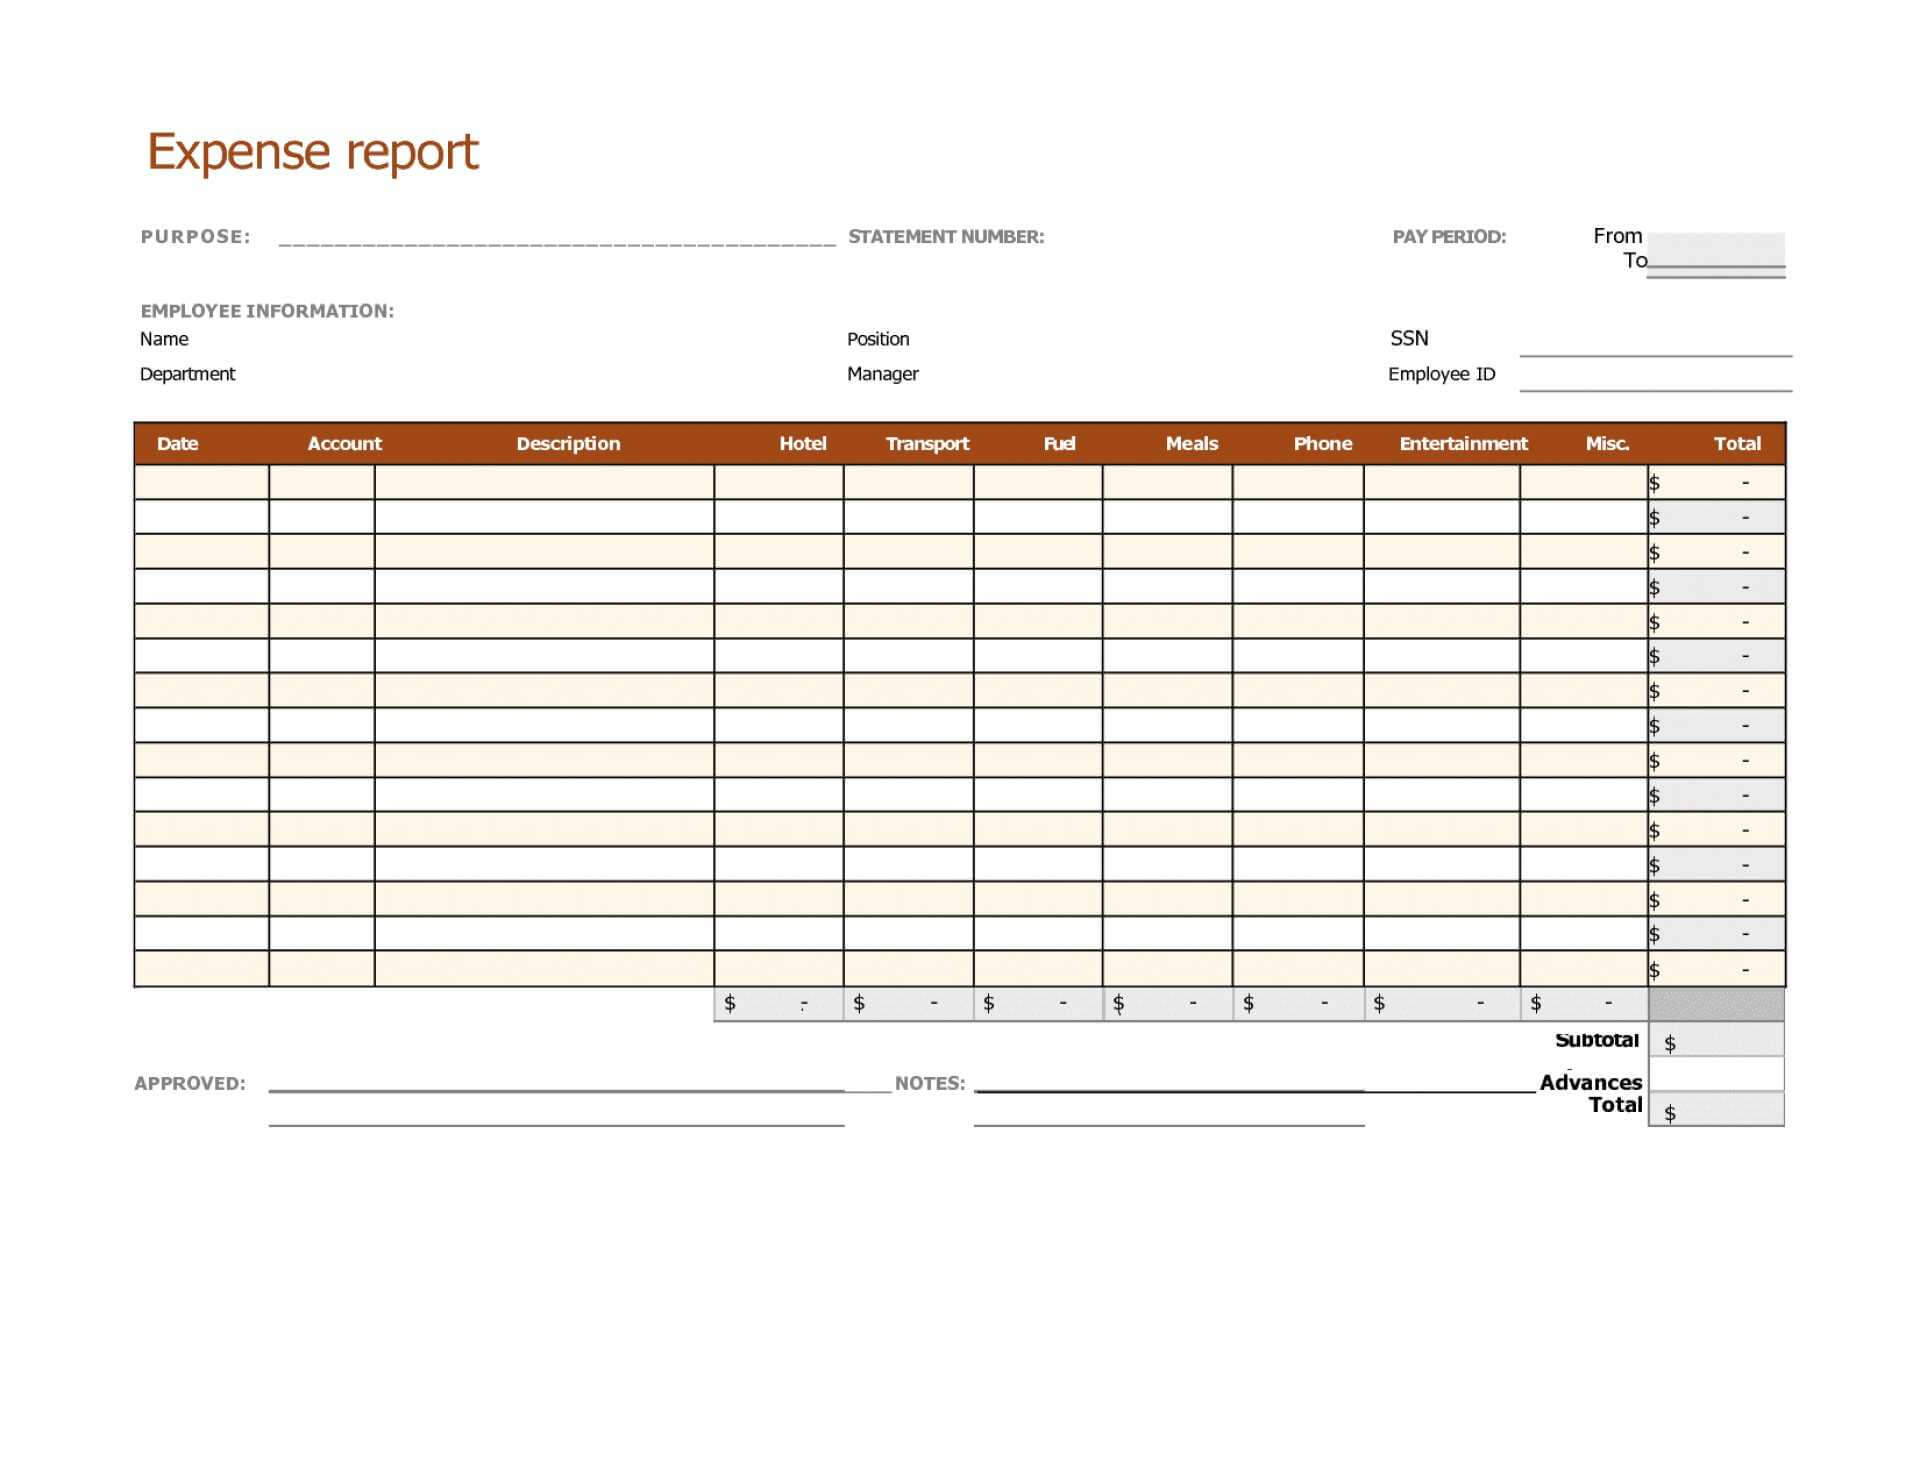 014 Travel Expense Report Template Business Trip Example In Business Trip Report Template